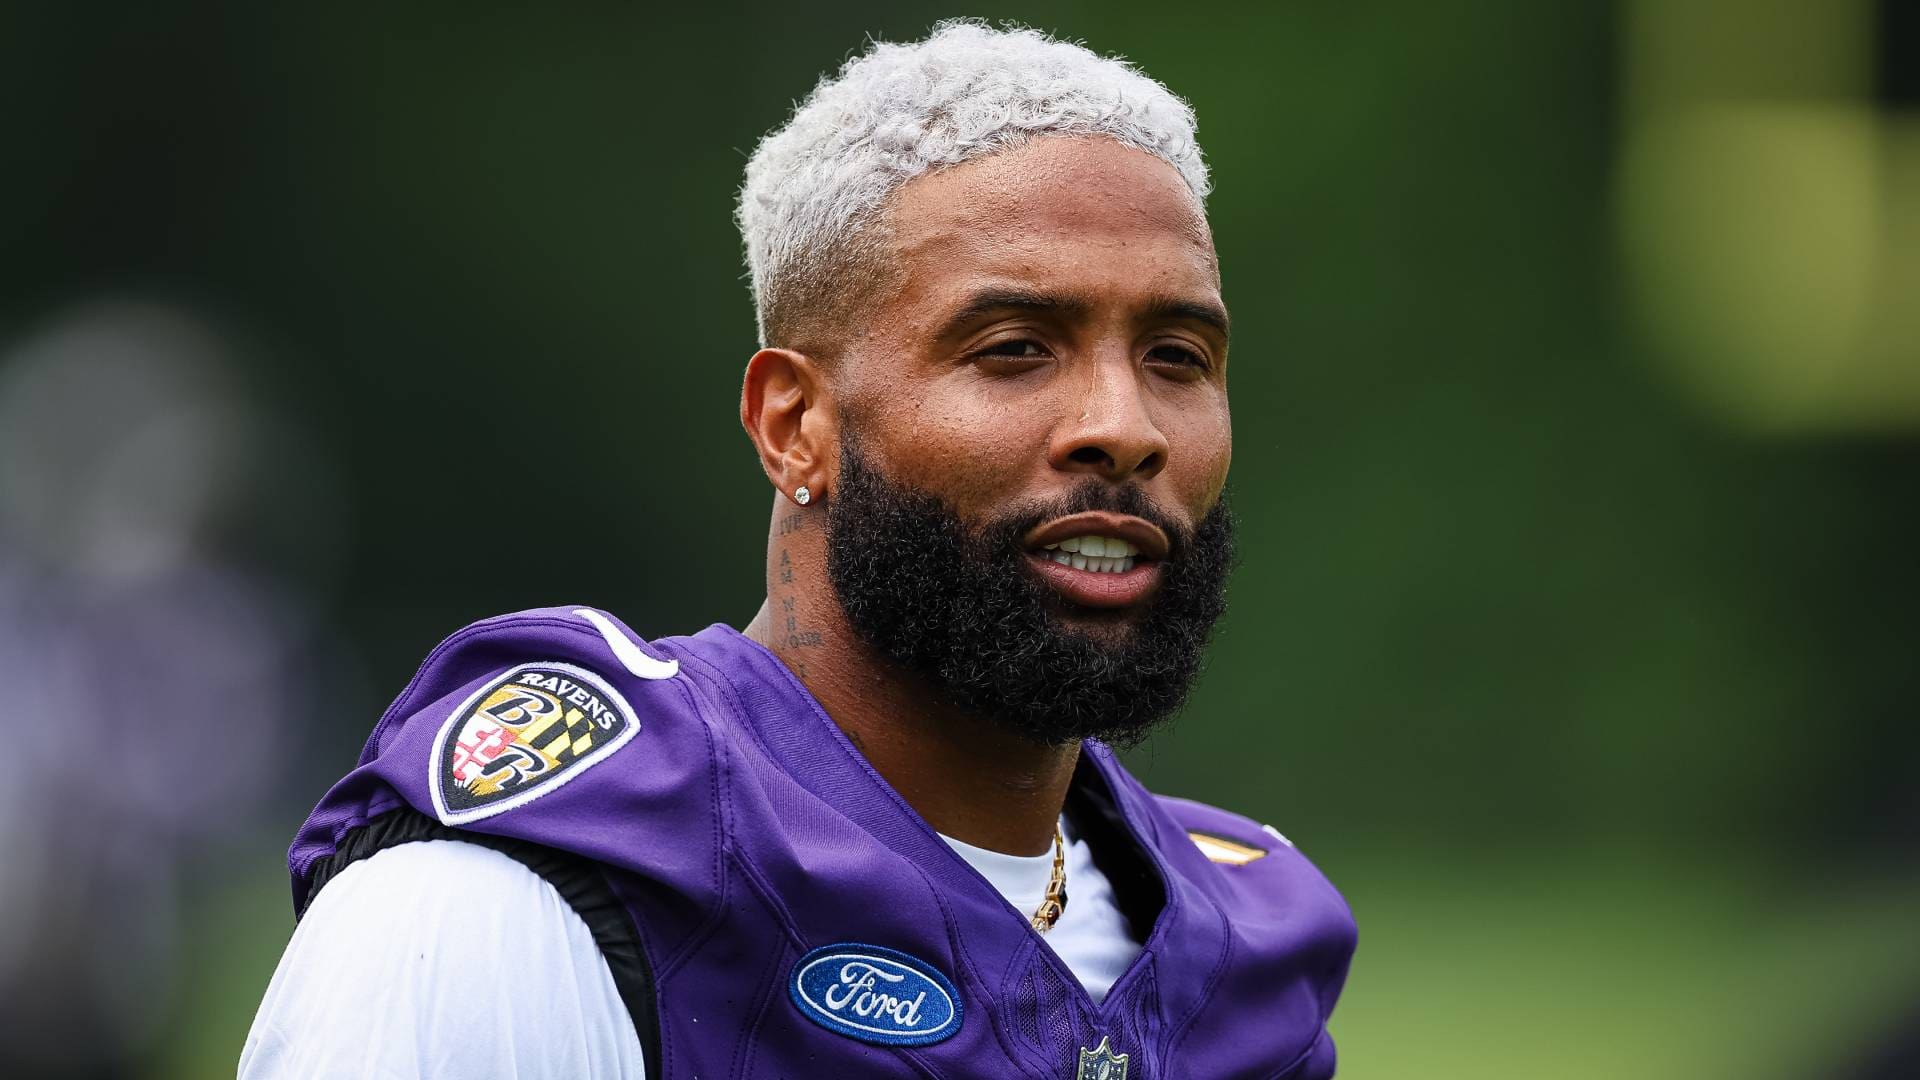 Ravens Release Odell Beckham Jr. After One Season, Making Wide Receiver an Unrestricted Free Agent